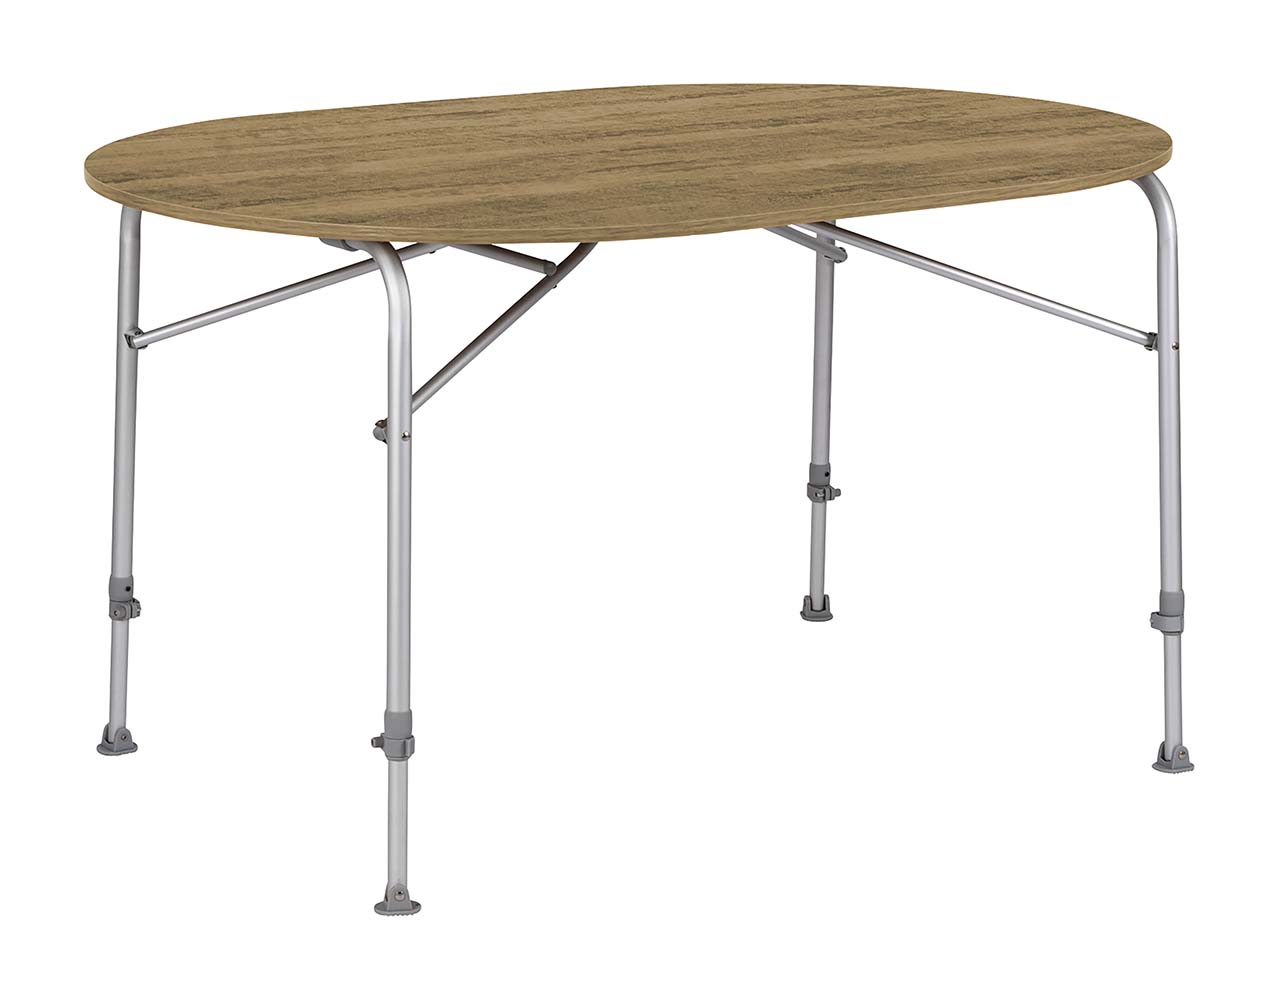 1404466 An extremely lightweight but very stable camping table with woodlook top. The table top is made of glass fiber with a plastic edge which is heat and water resistant. Equipped with an aluminum frame, height adjustable legs (59-72 cm) and stabilizers so that they stand firmly on any surface. In addition, the legs can be firmly secured with the rotary knobs in the adjustment system. Lightweight so ideal to take with you.